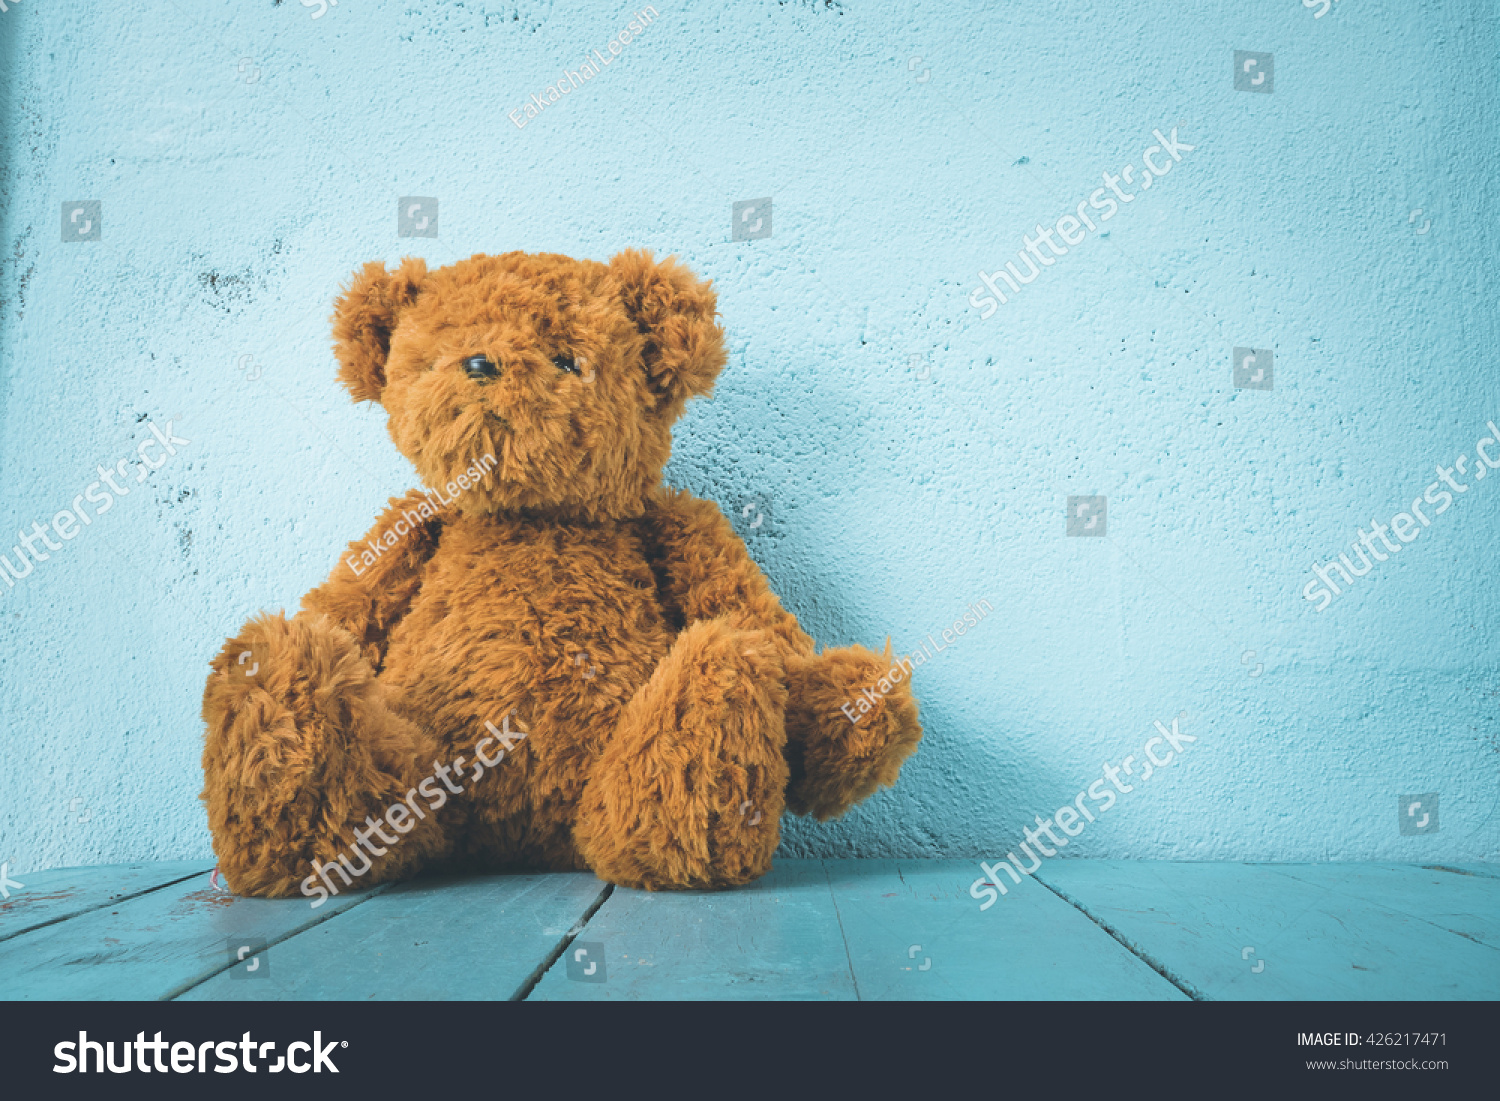 Teddy bear on a table have blue background, alone   #426217471